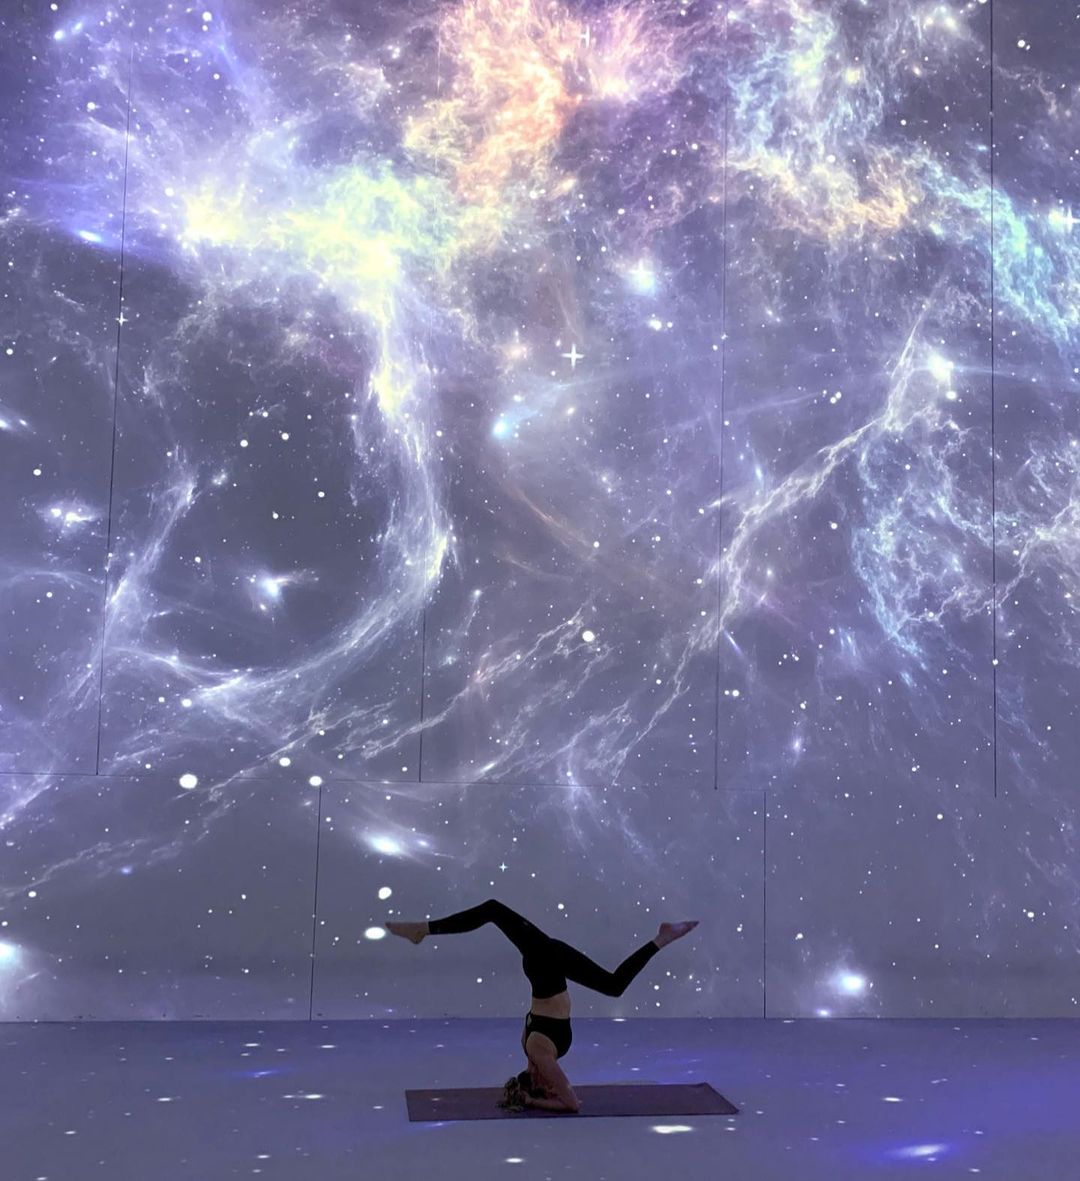 Jenna doing yoga in an open space with a galaxy projected on area